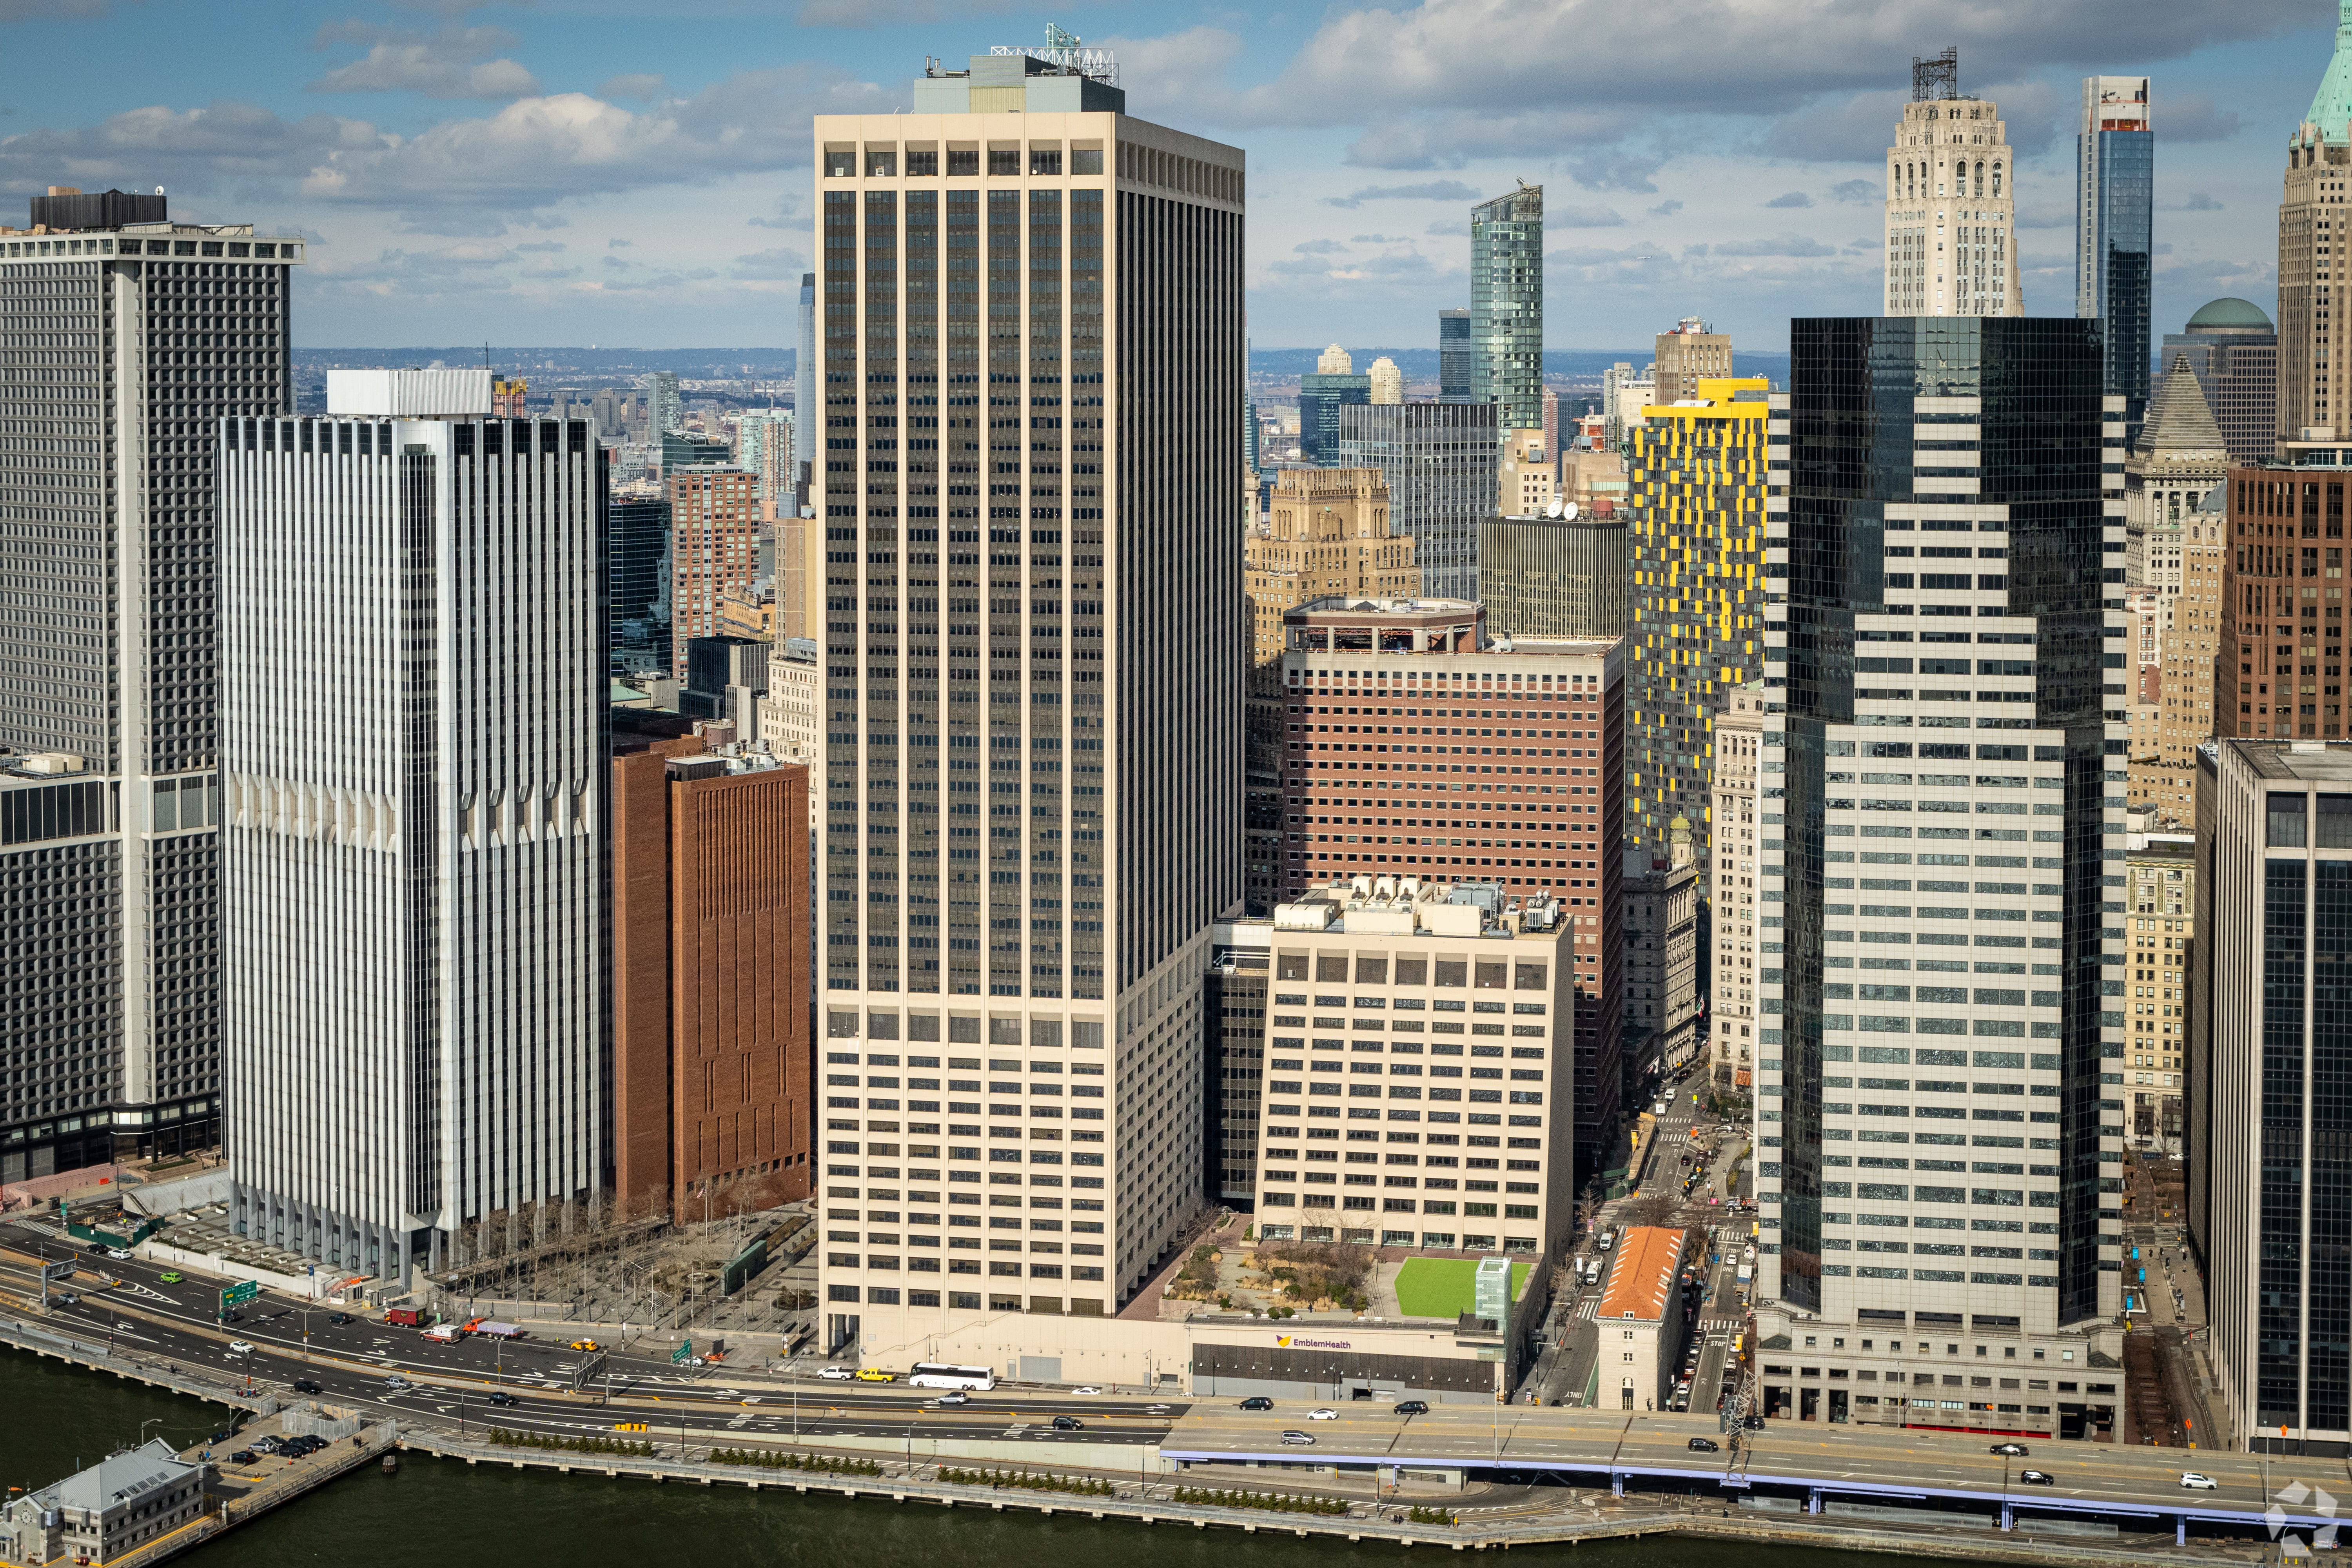 NYC commercial real estate won't recover from WFH for 10 years